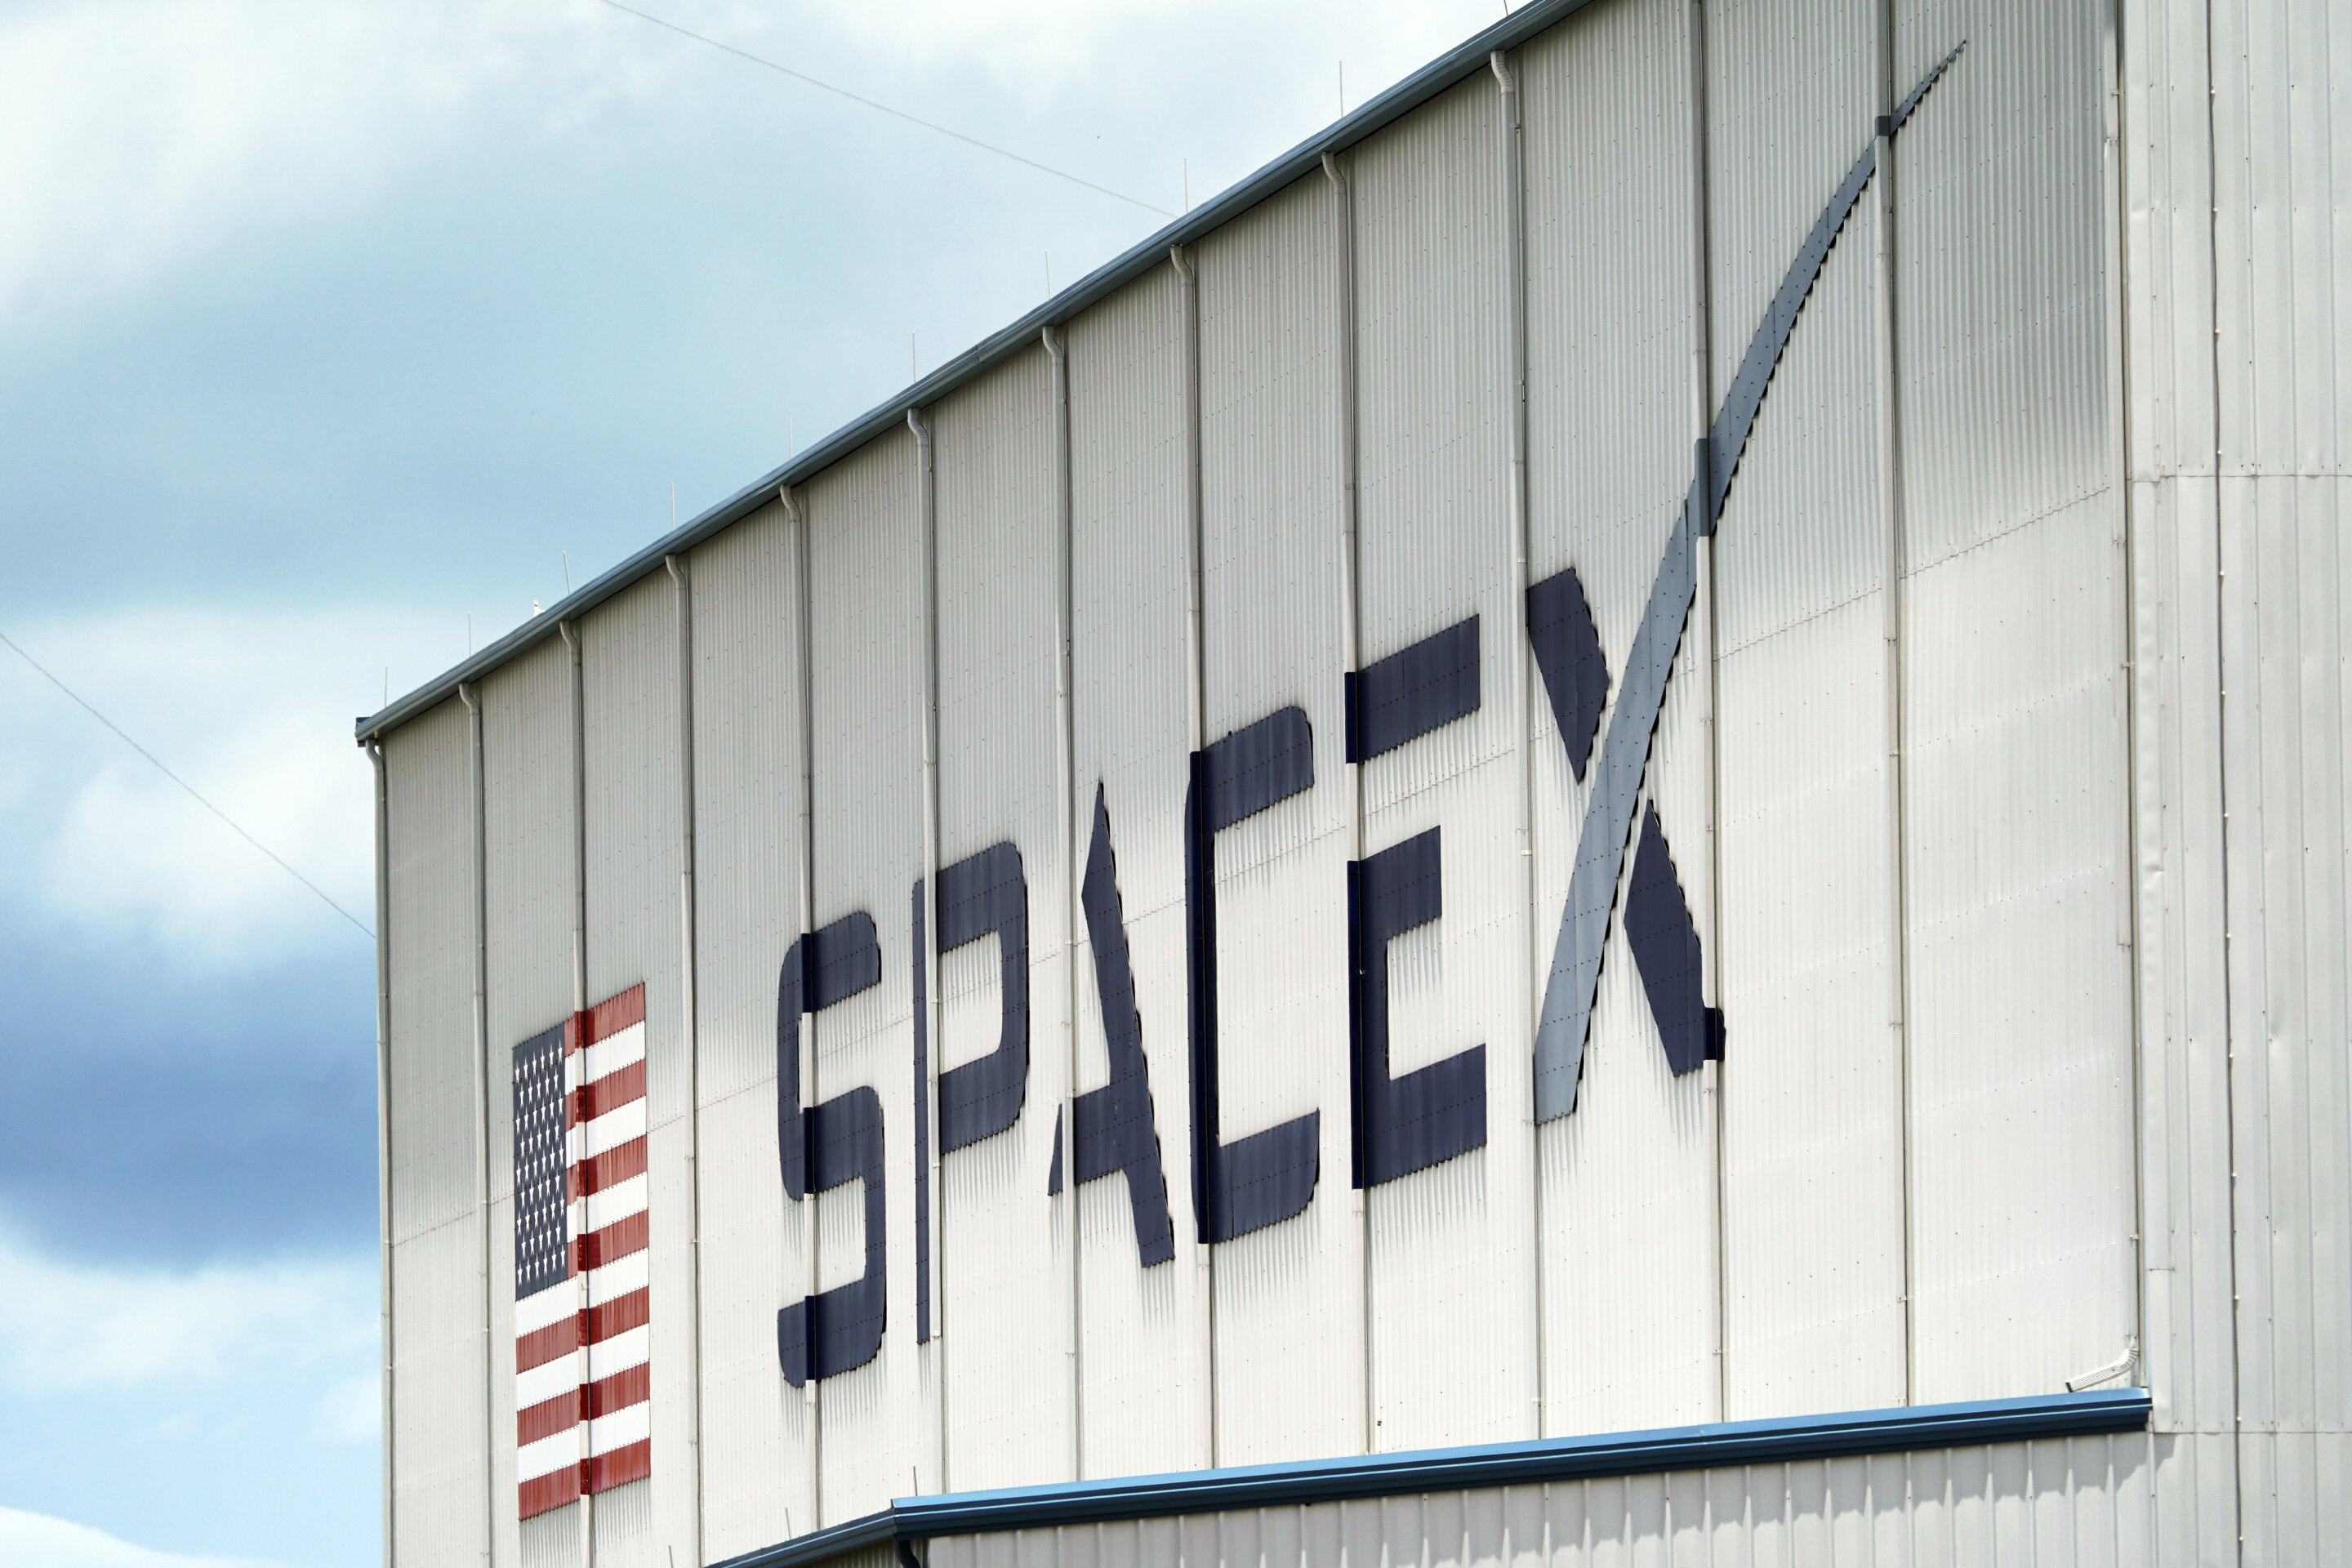 #SpaceX reported to fire employees critical of CEO Elon Musk